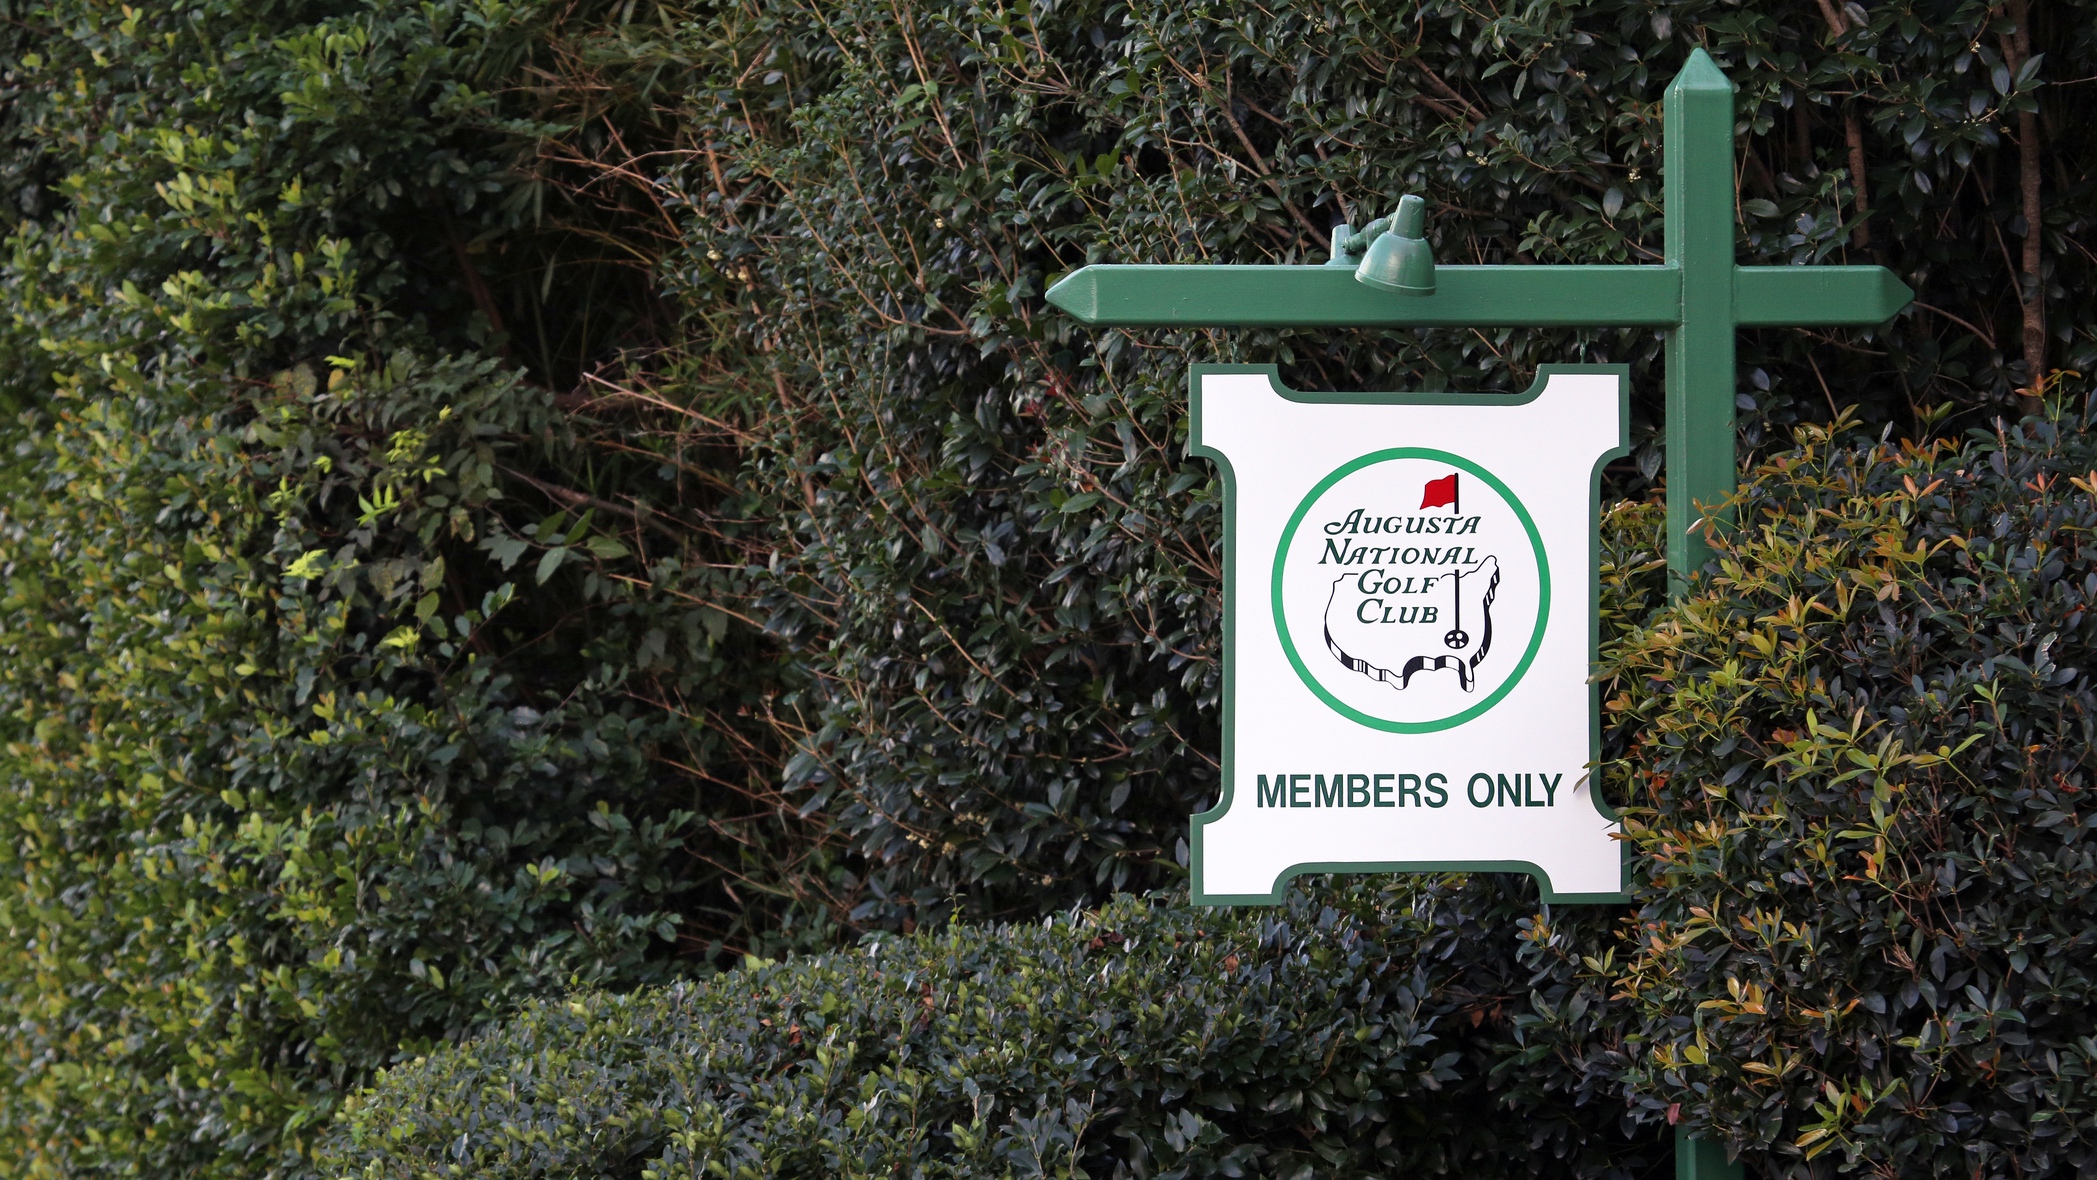 Augusta National Golf Club sign at The Masters